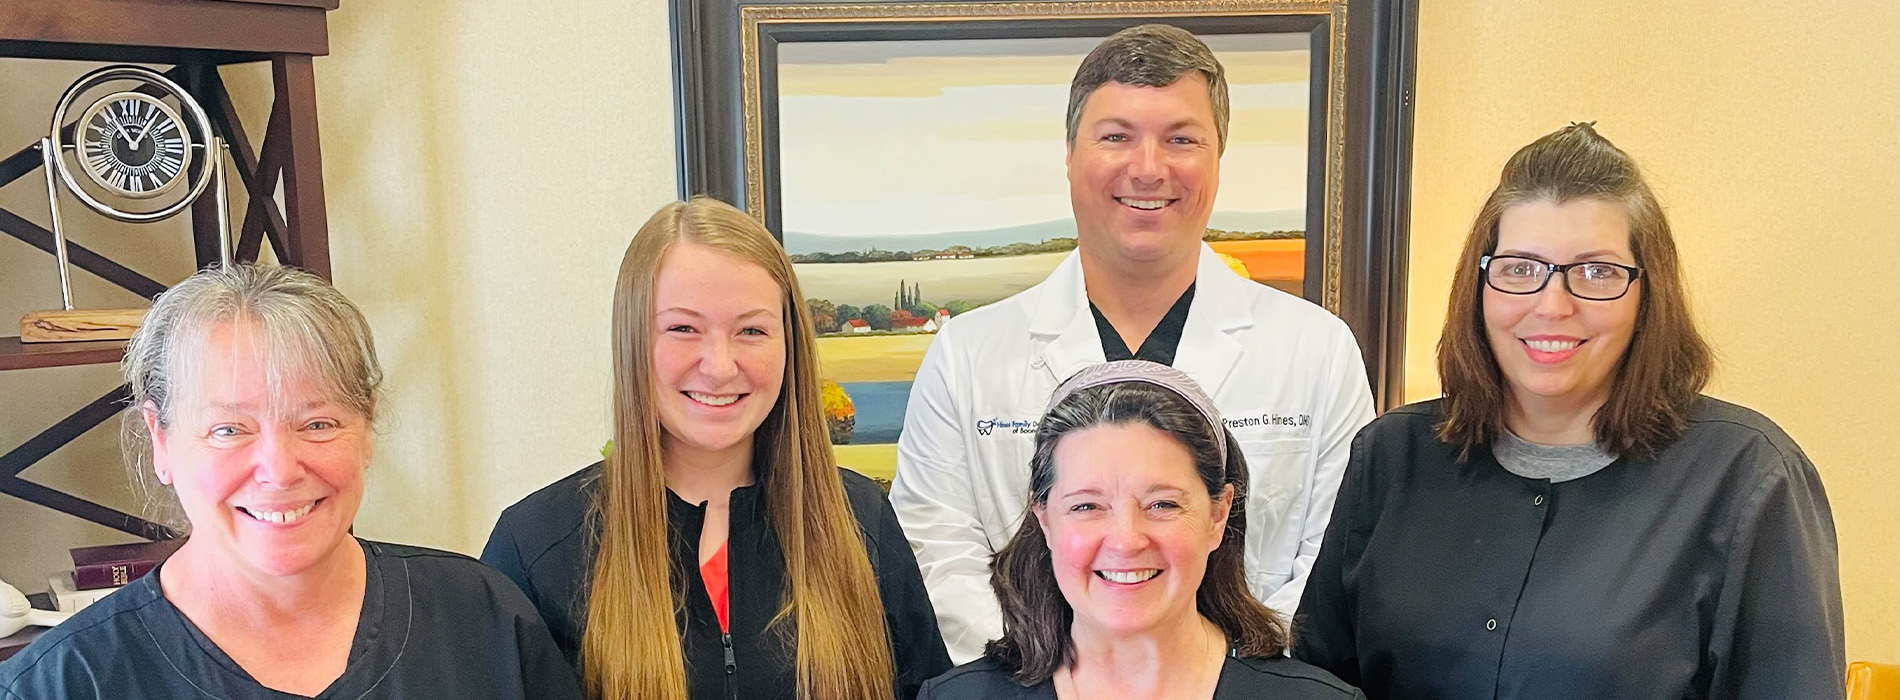 Hines Family Dentistry of Boone | Snoring Appliances, Dental Cleanings and Pediatric Dentistry